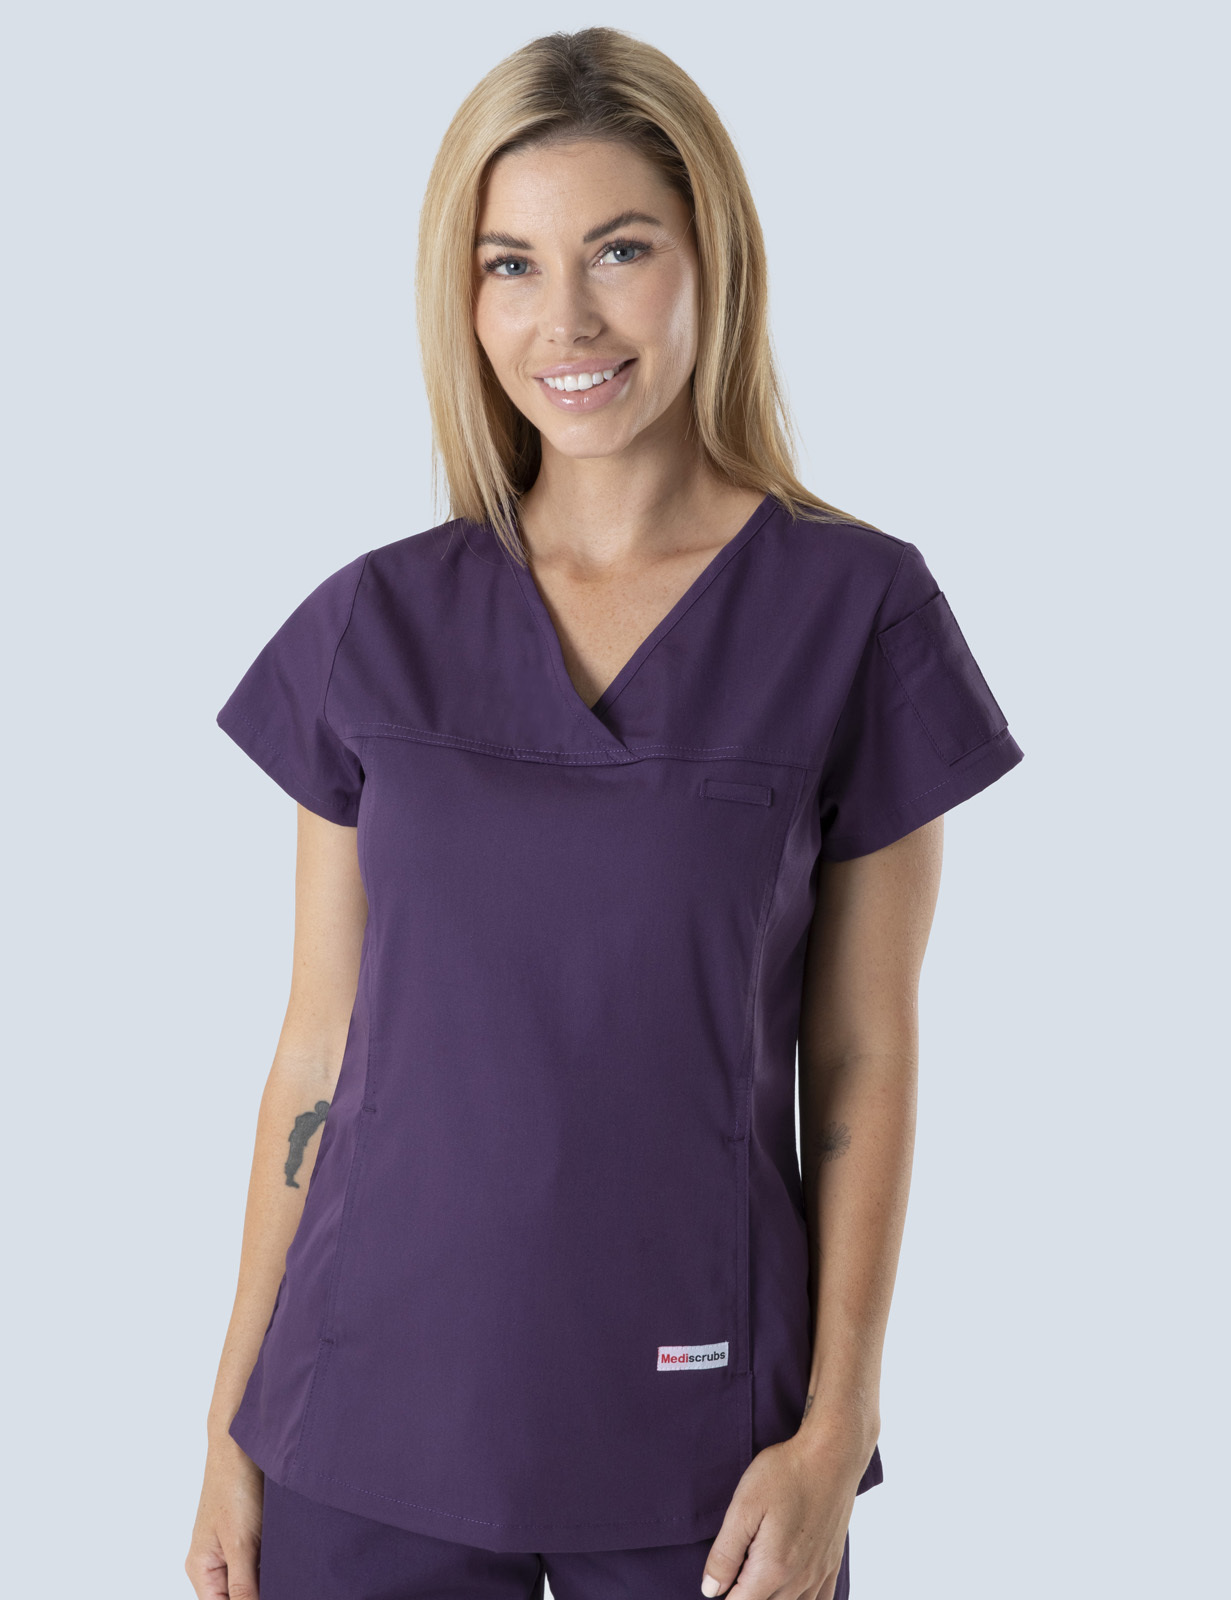 The Alfred Hospital Pathology Uniform Top Bundle (Women's Fit Solid Top in Aubergine incl Logo)